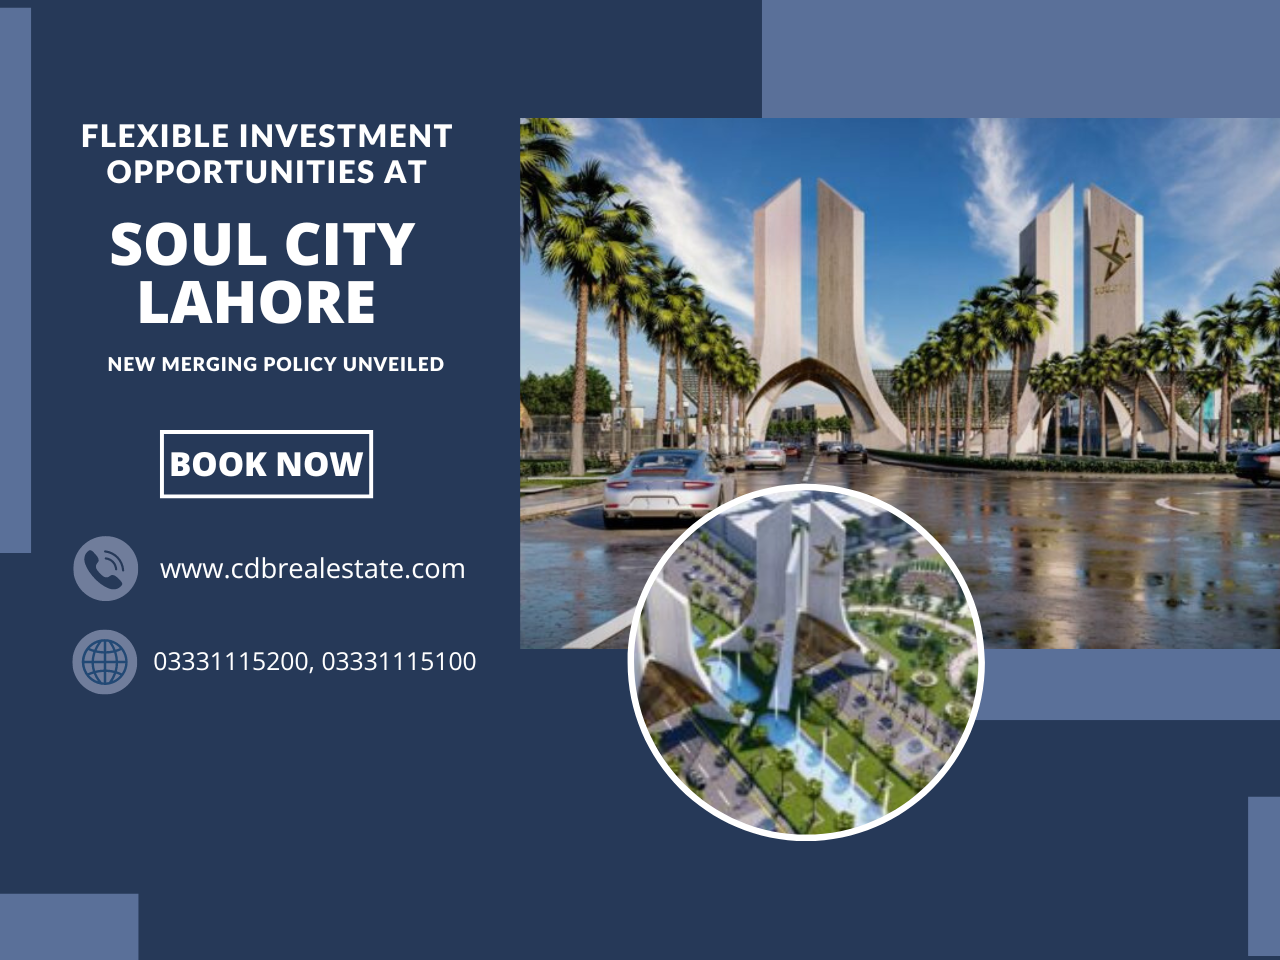 Soul City Flexible Investment Opportunities at Lahore New Merging Policy Unveiled